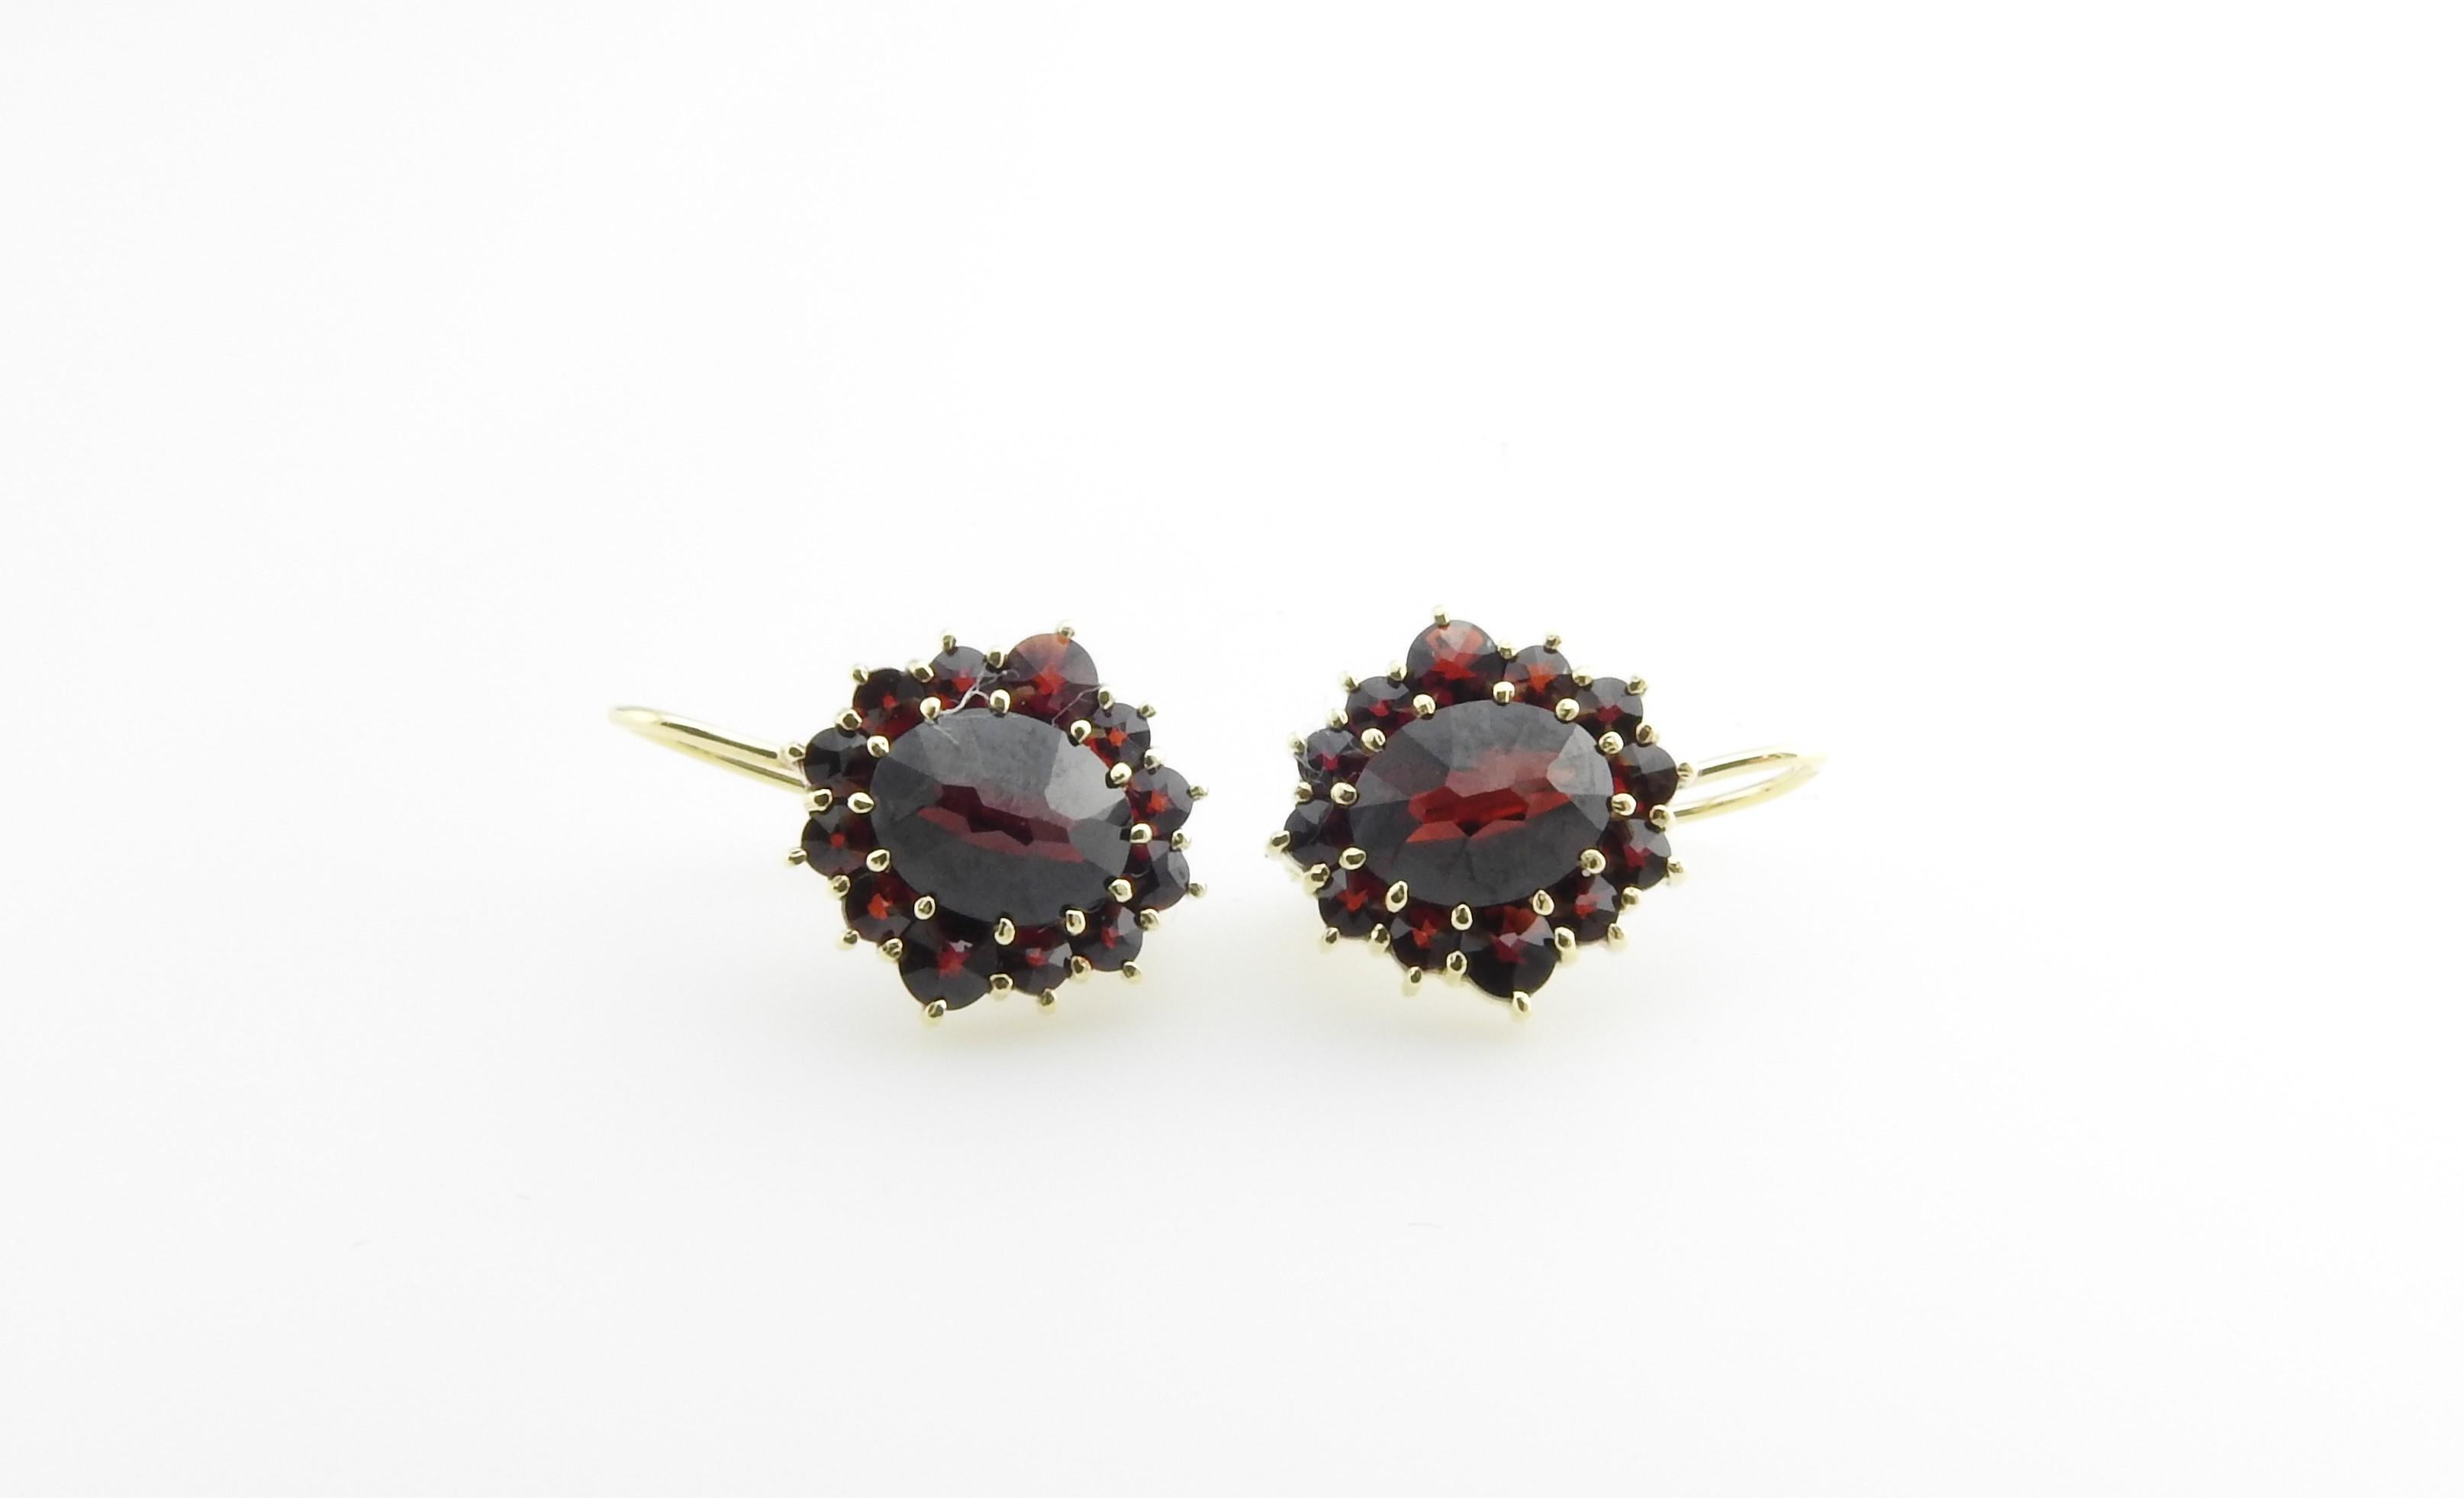 Vintage 14 Karat Yellow Gold and Simulated Garnet Earrings

These lovely earrings each feature 13 simulated garnets set in elegant 14K yellow gold. Hinged closures.

Size: 14 mm x mm

Weight: 4.8 g

Stamped: 585

Very good condition, professionally